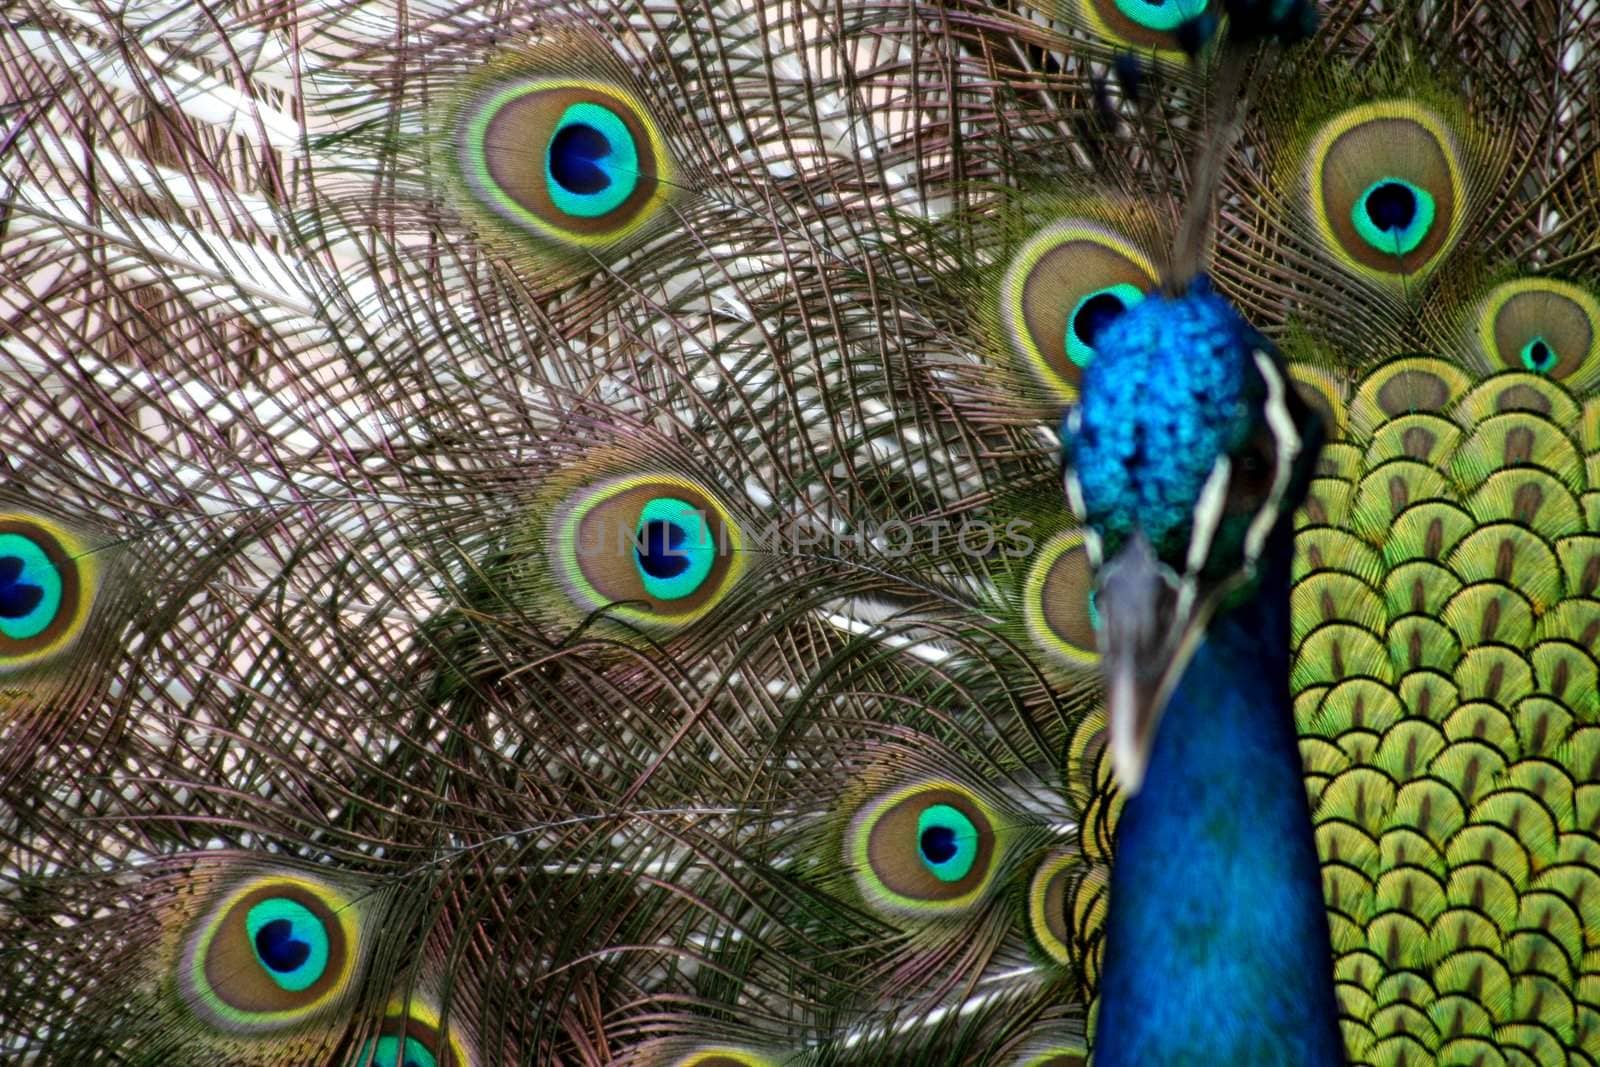 Peacock by monner